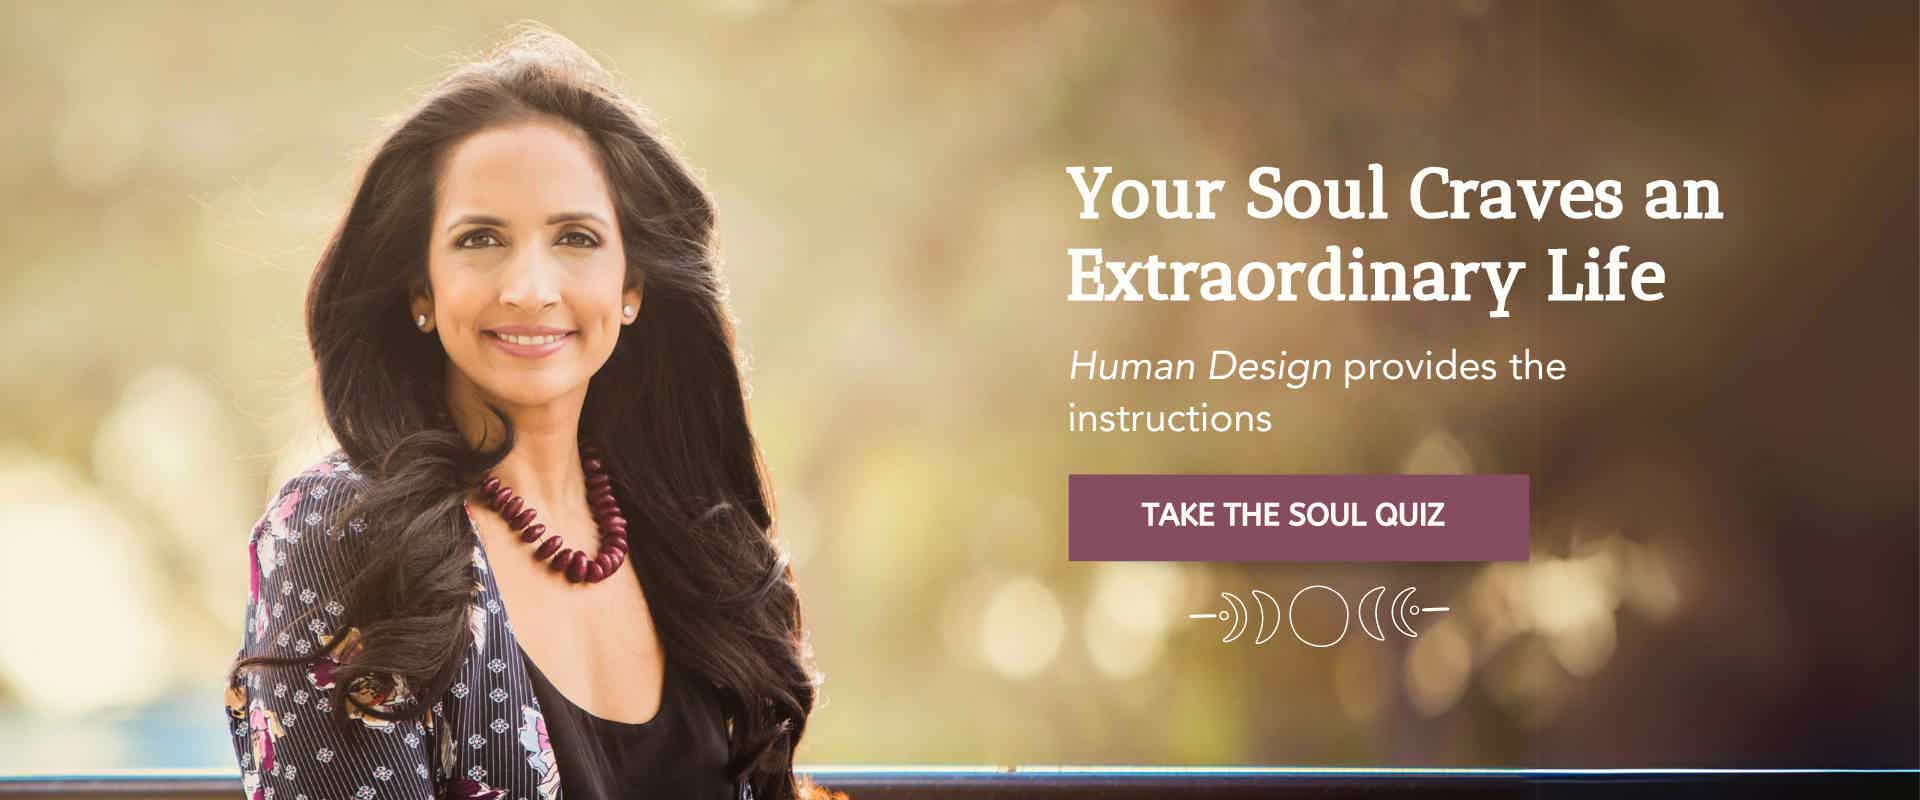 Human Design for your Soul that craves an extraordinary life. Take the Soul Quiz!